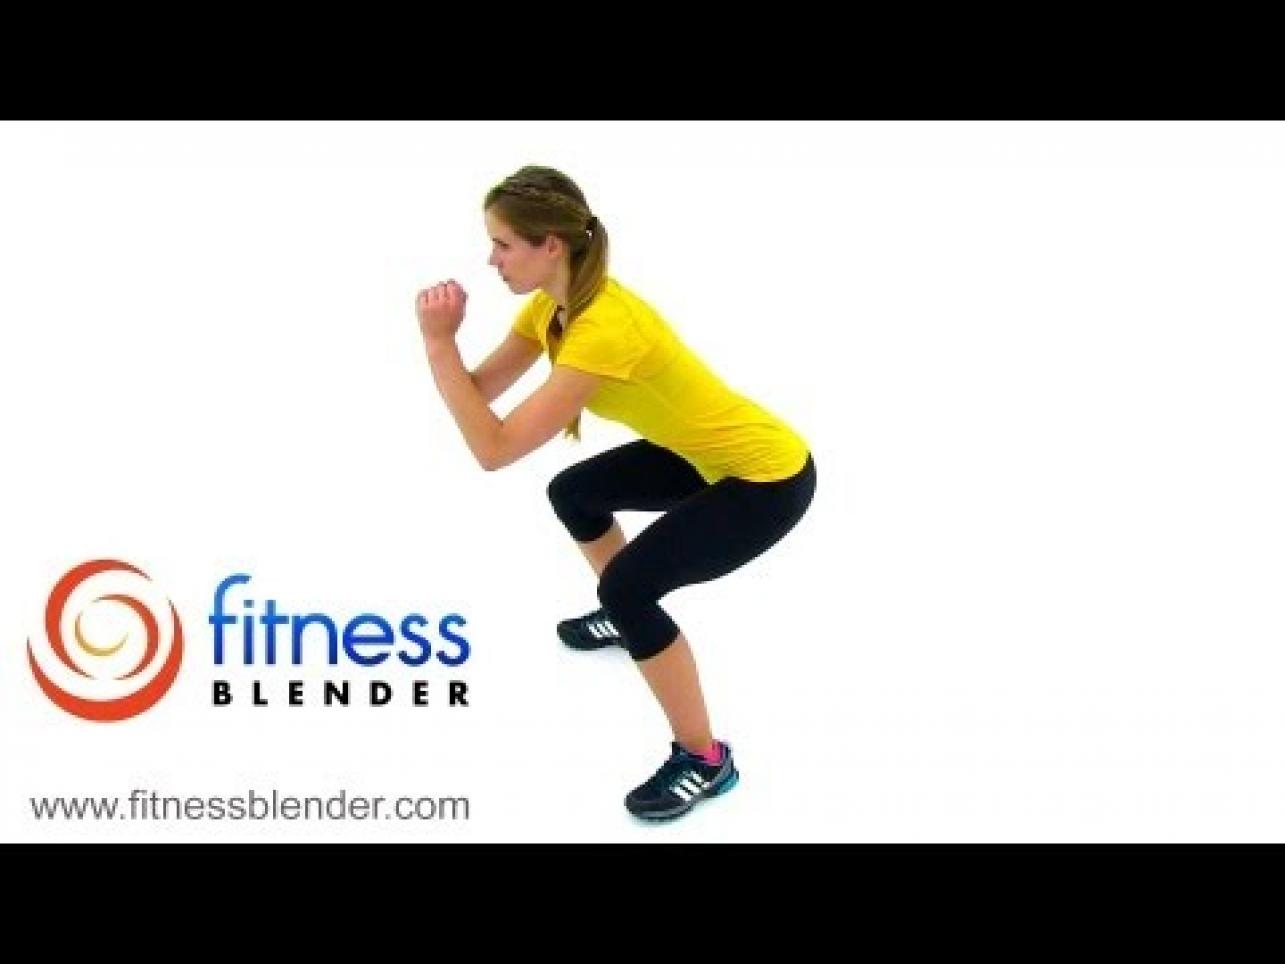 Cardio + Lower Body Toning – 44 Min Better Booty Tabata Workout (Video)